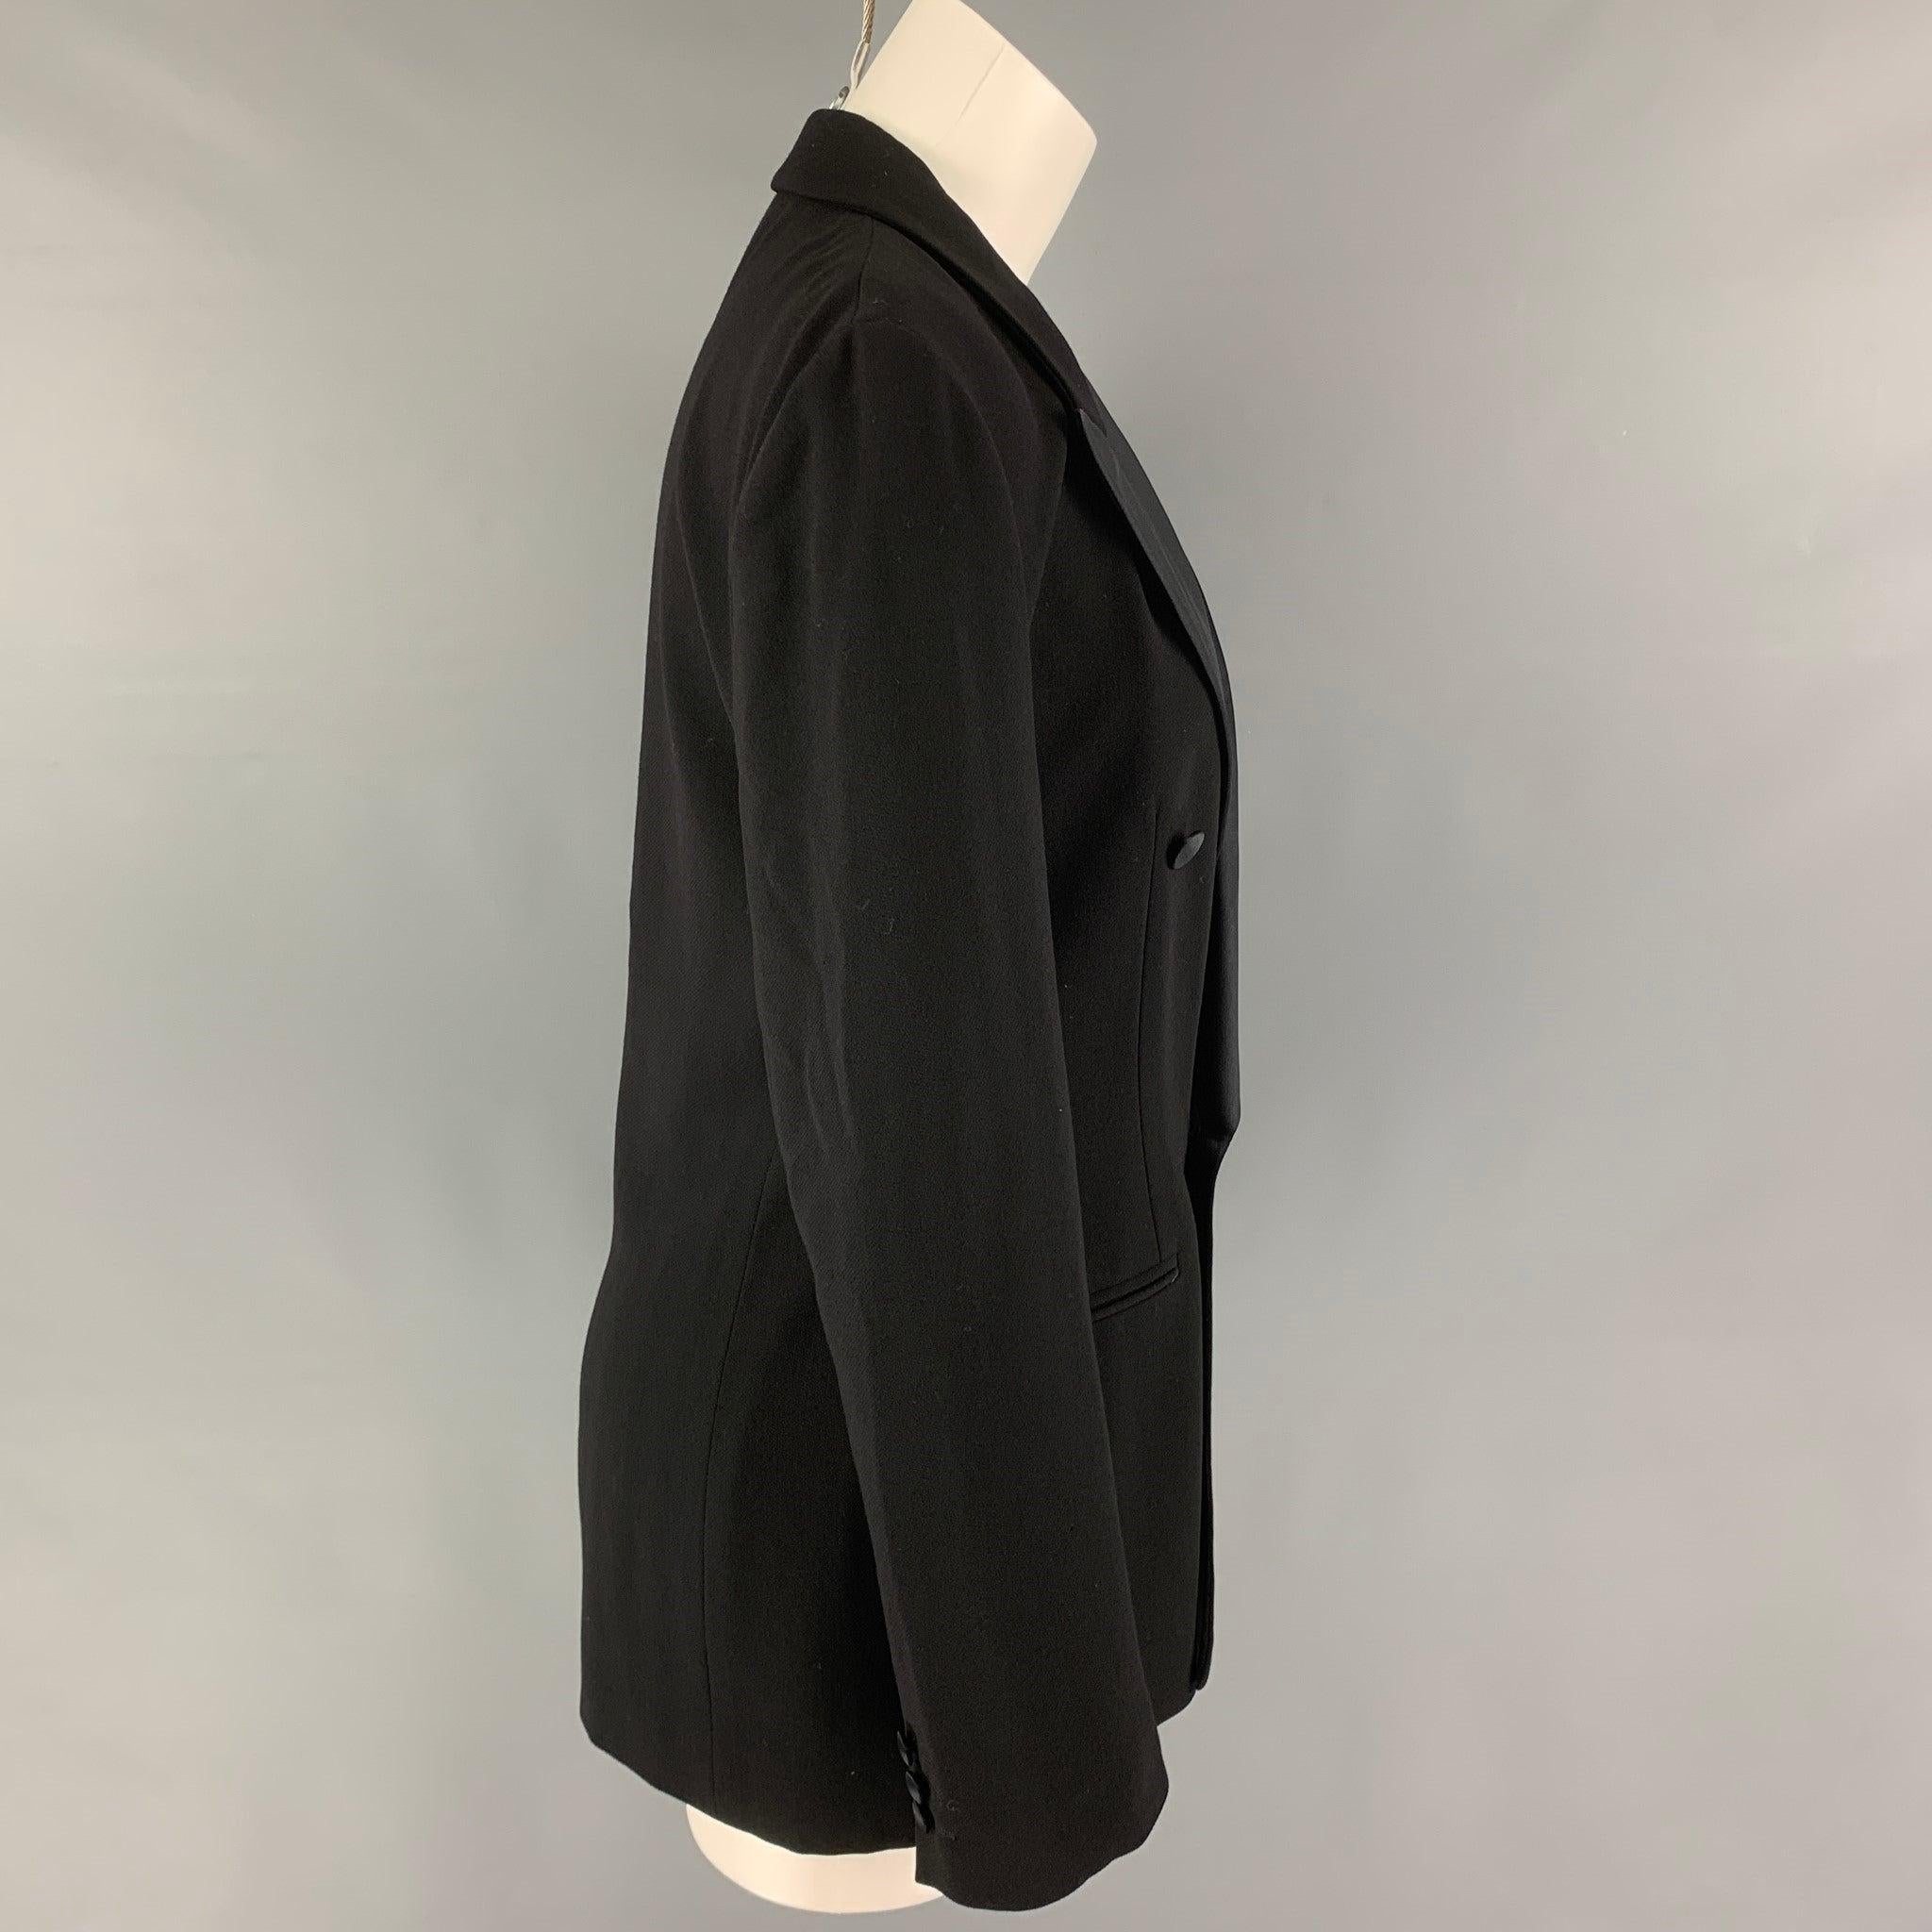 GIORGIO ARMANI jacket comes in a black wool with a full liner featuring a peak lapel, slit pockets, and a double breasted closure. Made in Italy.
Excellent Pre-Owned Condition. 

Marked:   42 

Measurements: 
 
Shoulder: 17.5 inches Bust: 36 inches